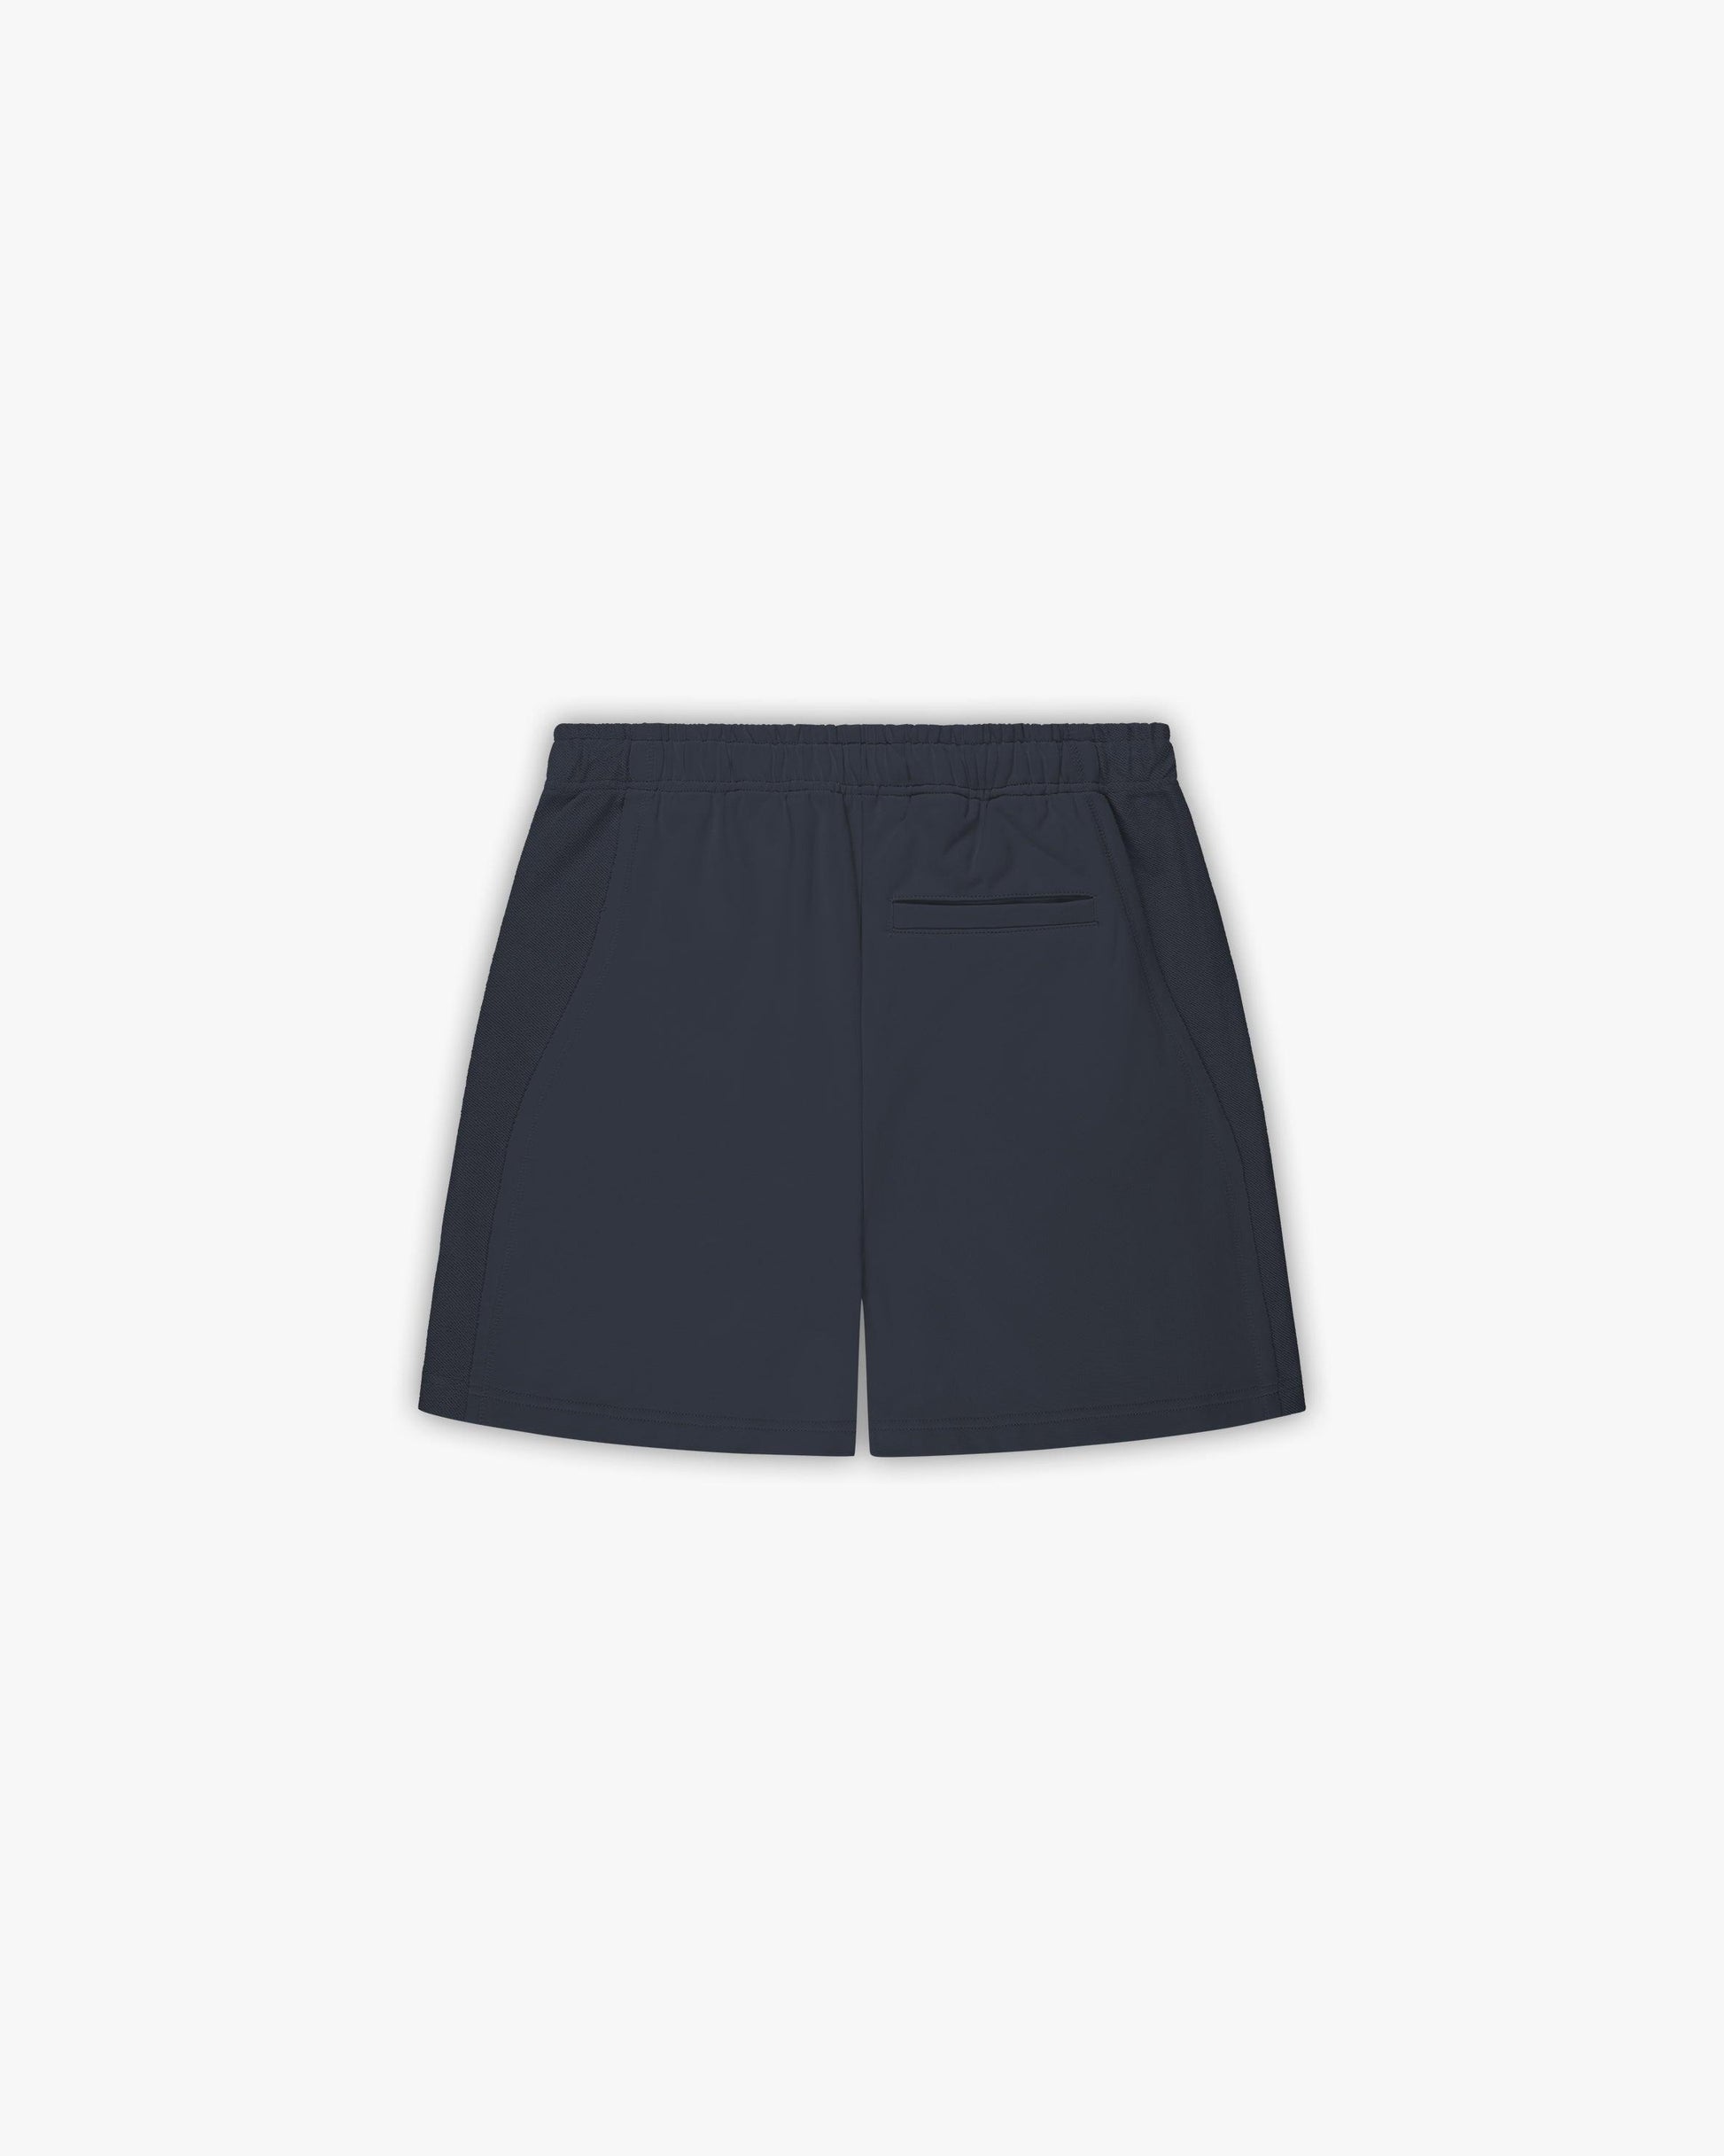 INSIDE OUT SHORTS NAVY - VICINITY